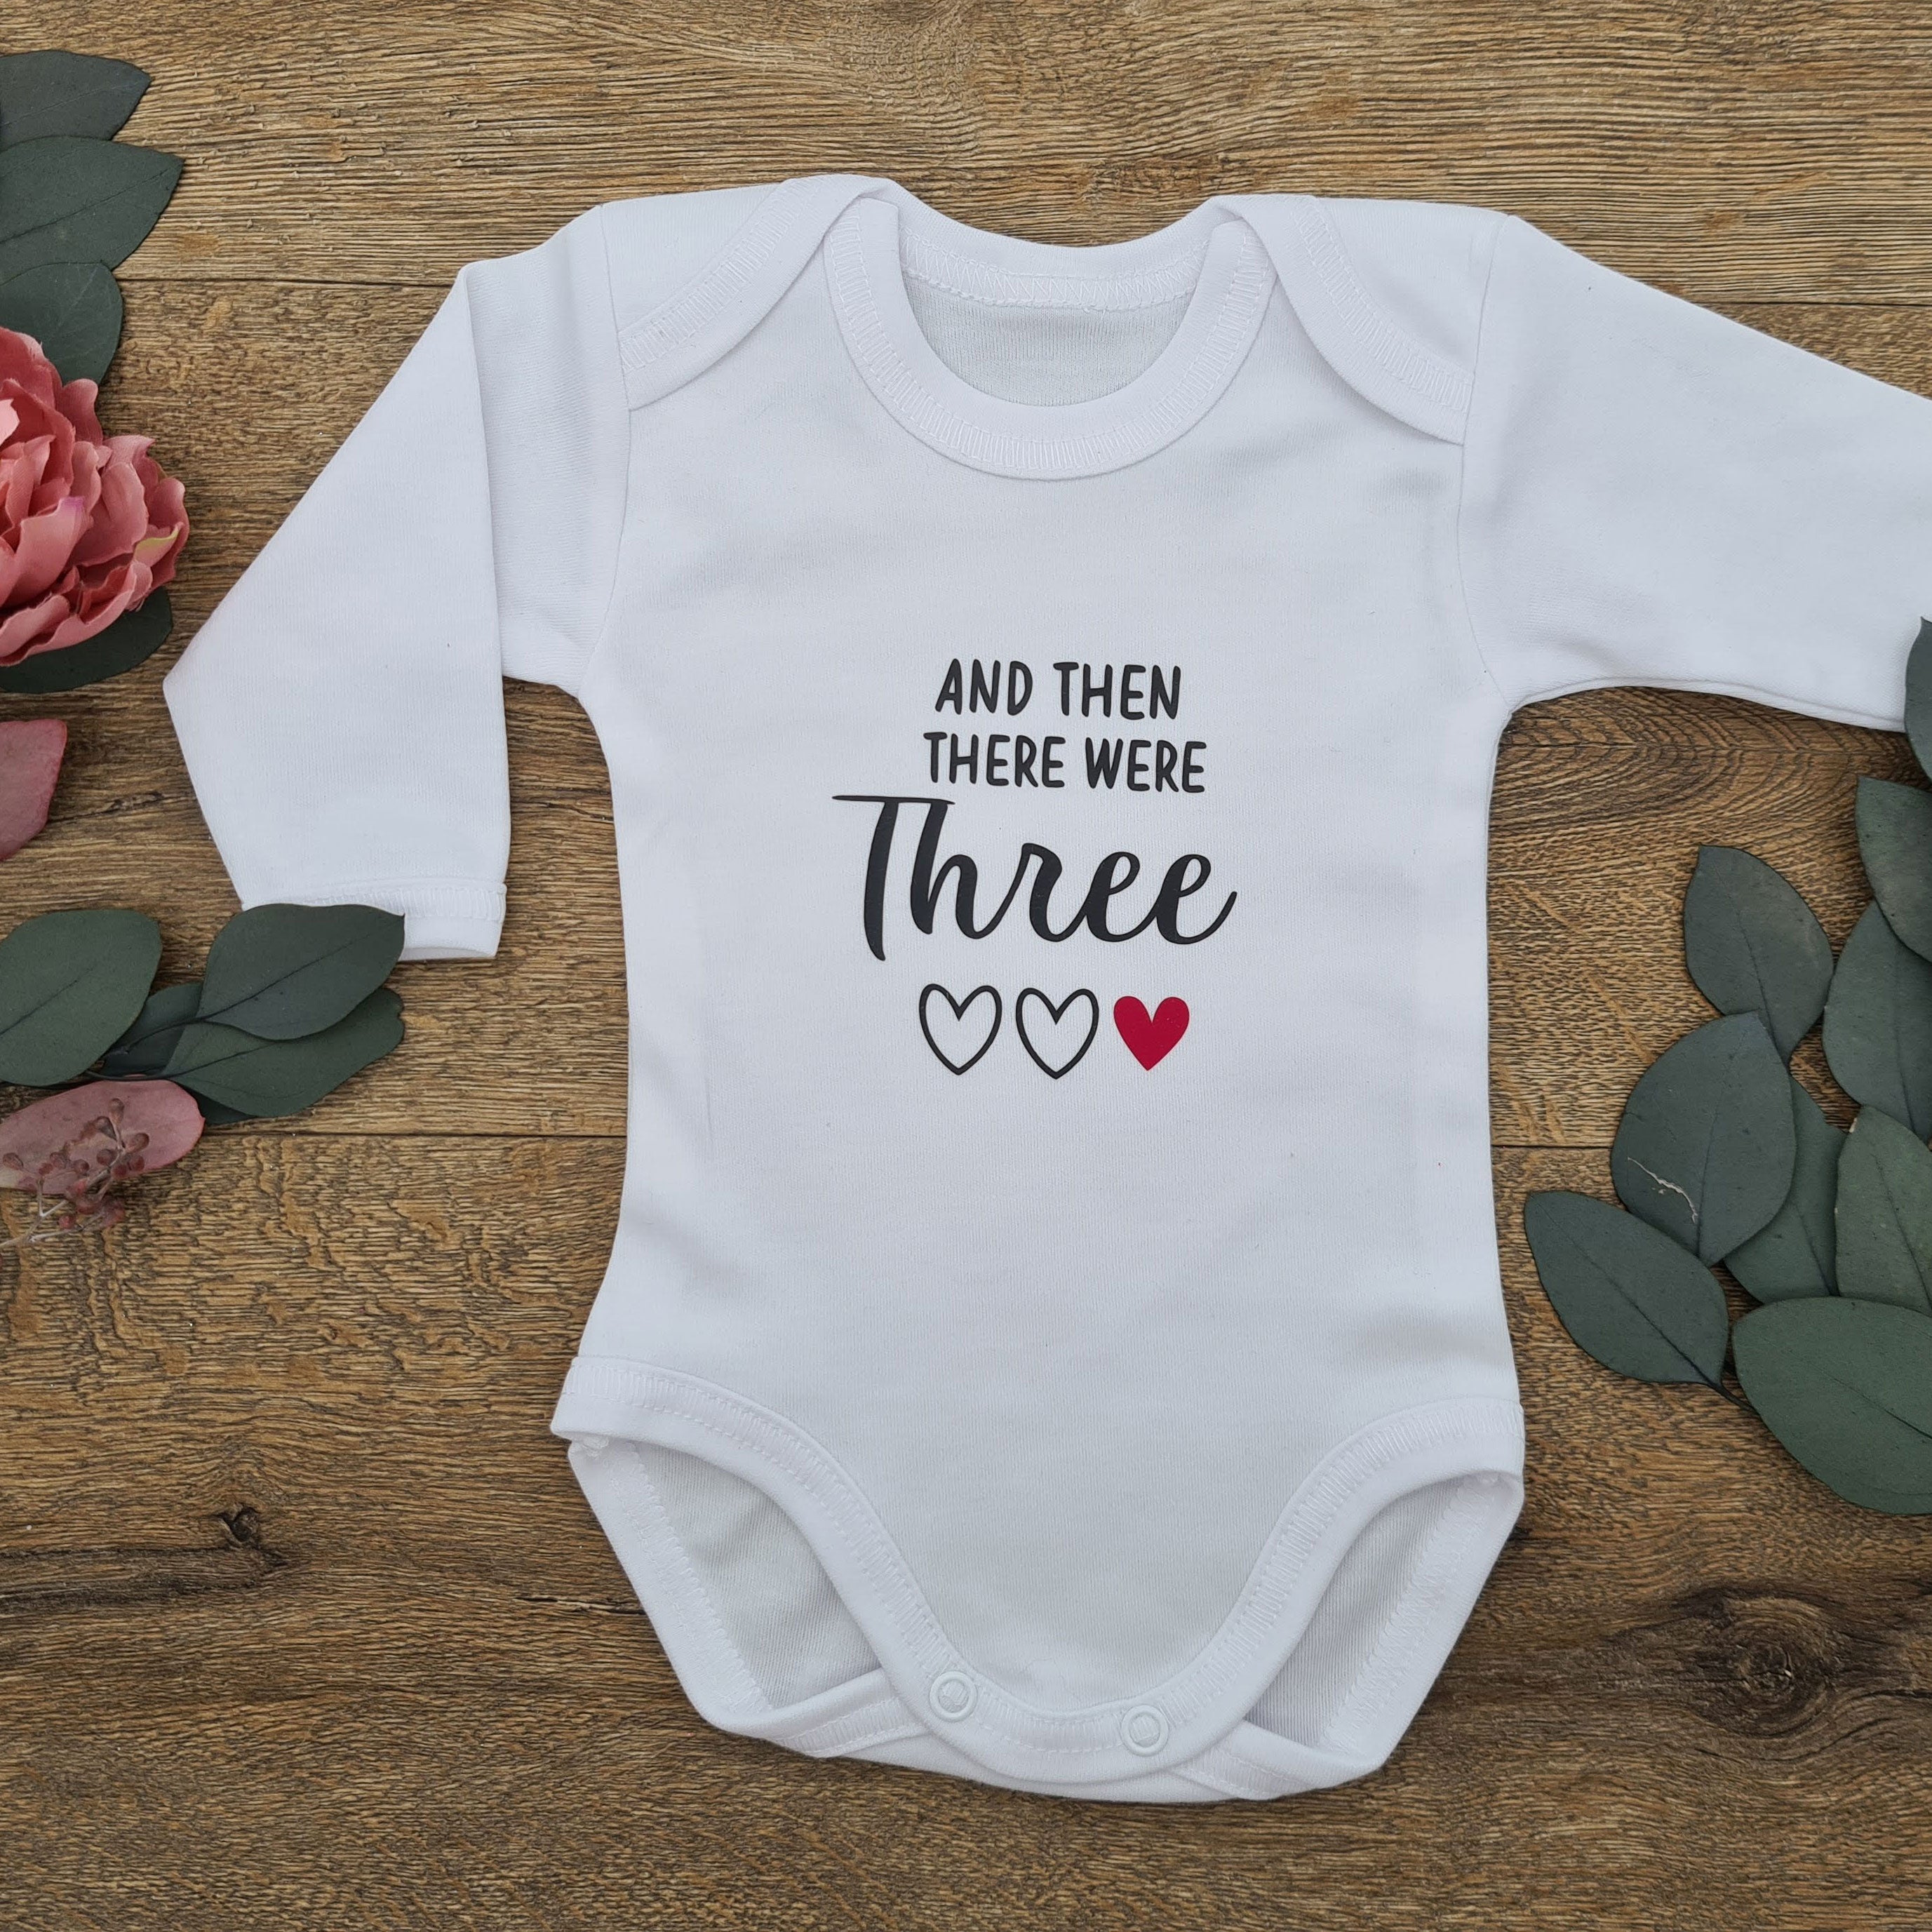 Pregnancy Announcement Onesie - "And then there were Three (3)"